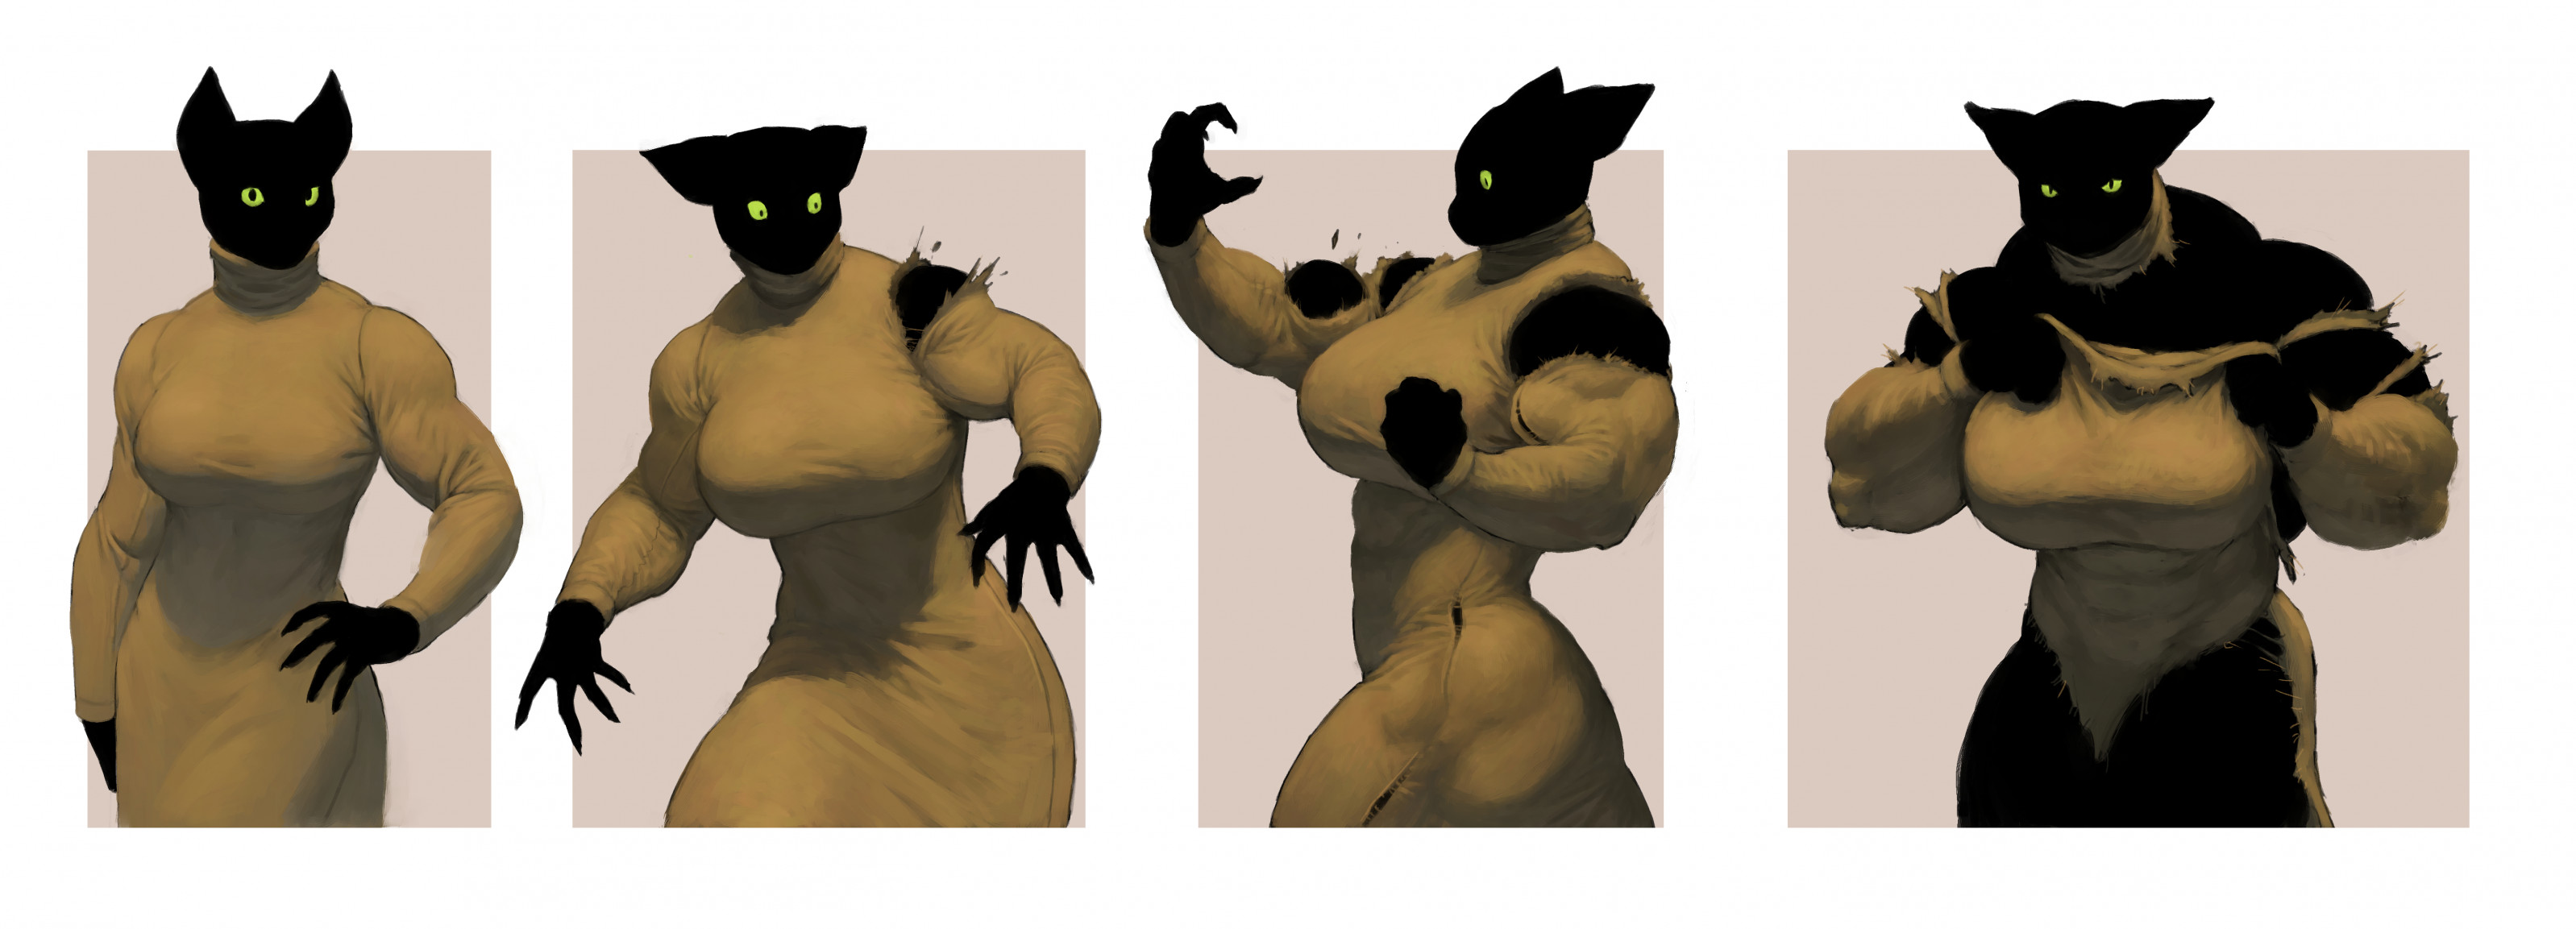 Silhouette muscle growth sequence by Samihameha -- Fur Affinity [dot] net